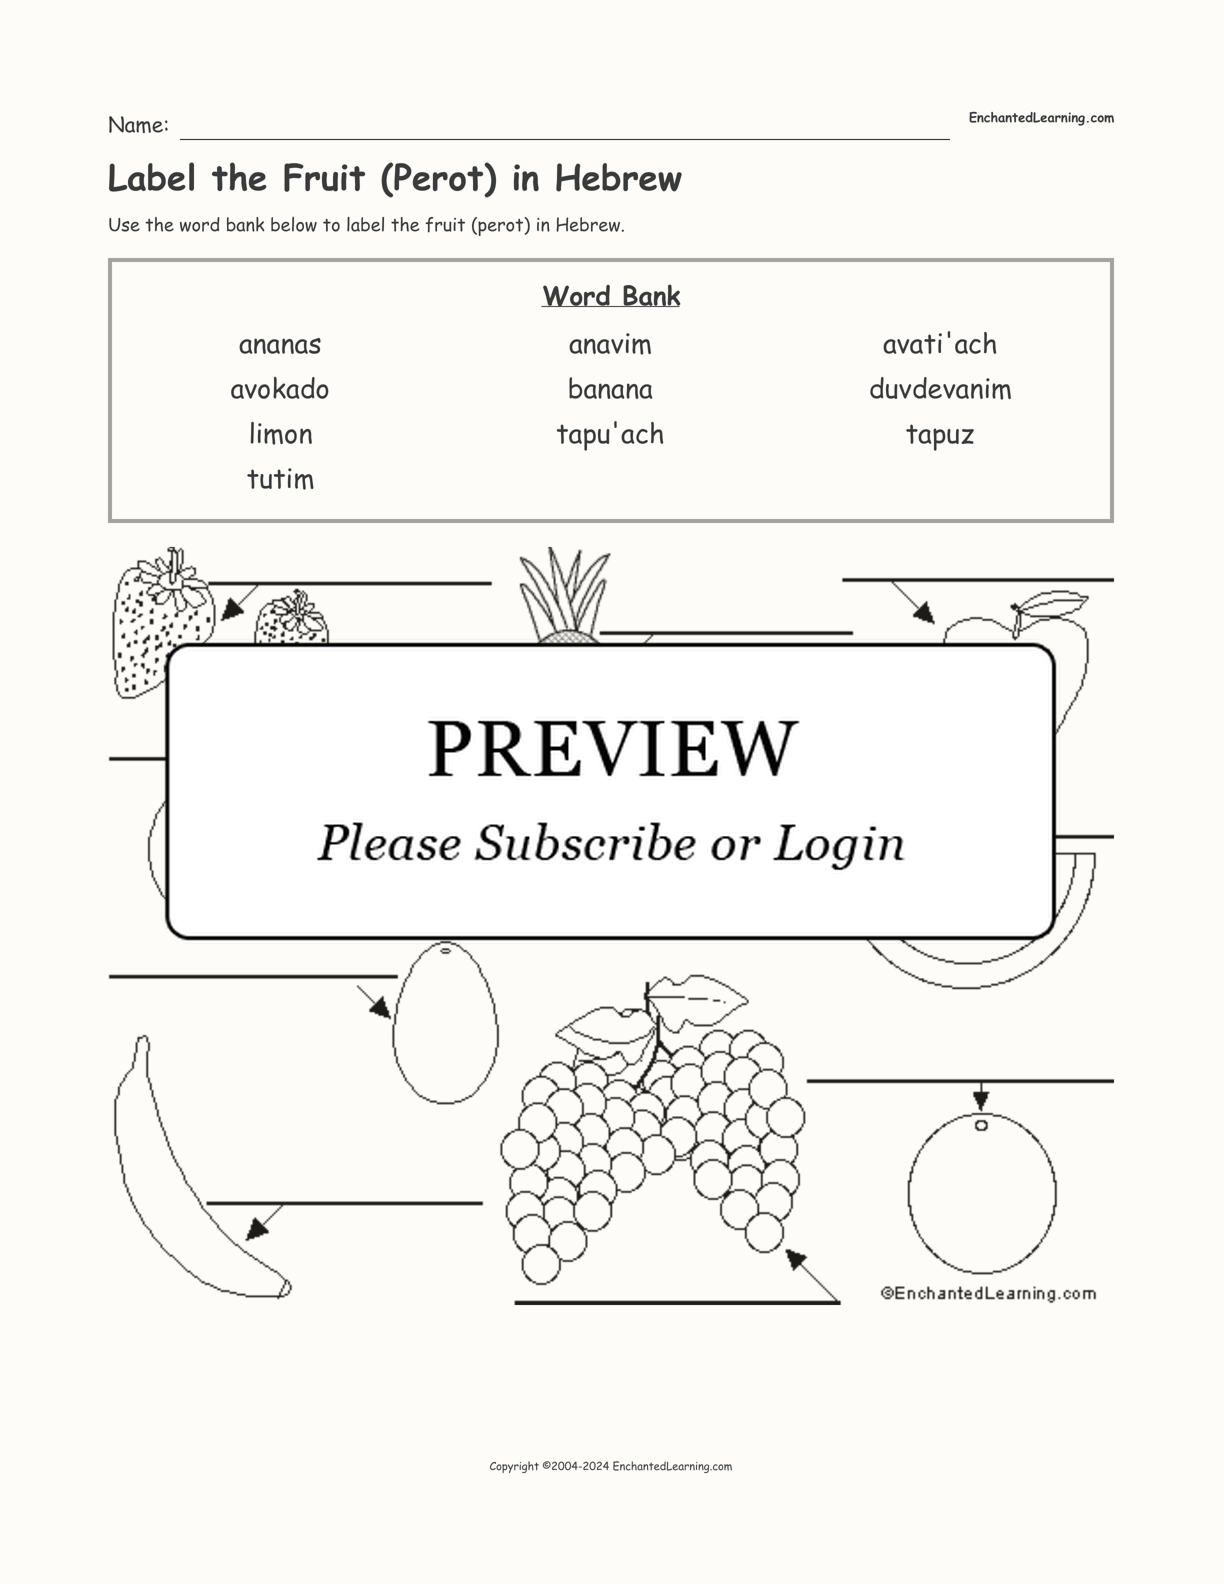 Label the Fruit (Perot) in Hebrew interactive worksheet page 1